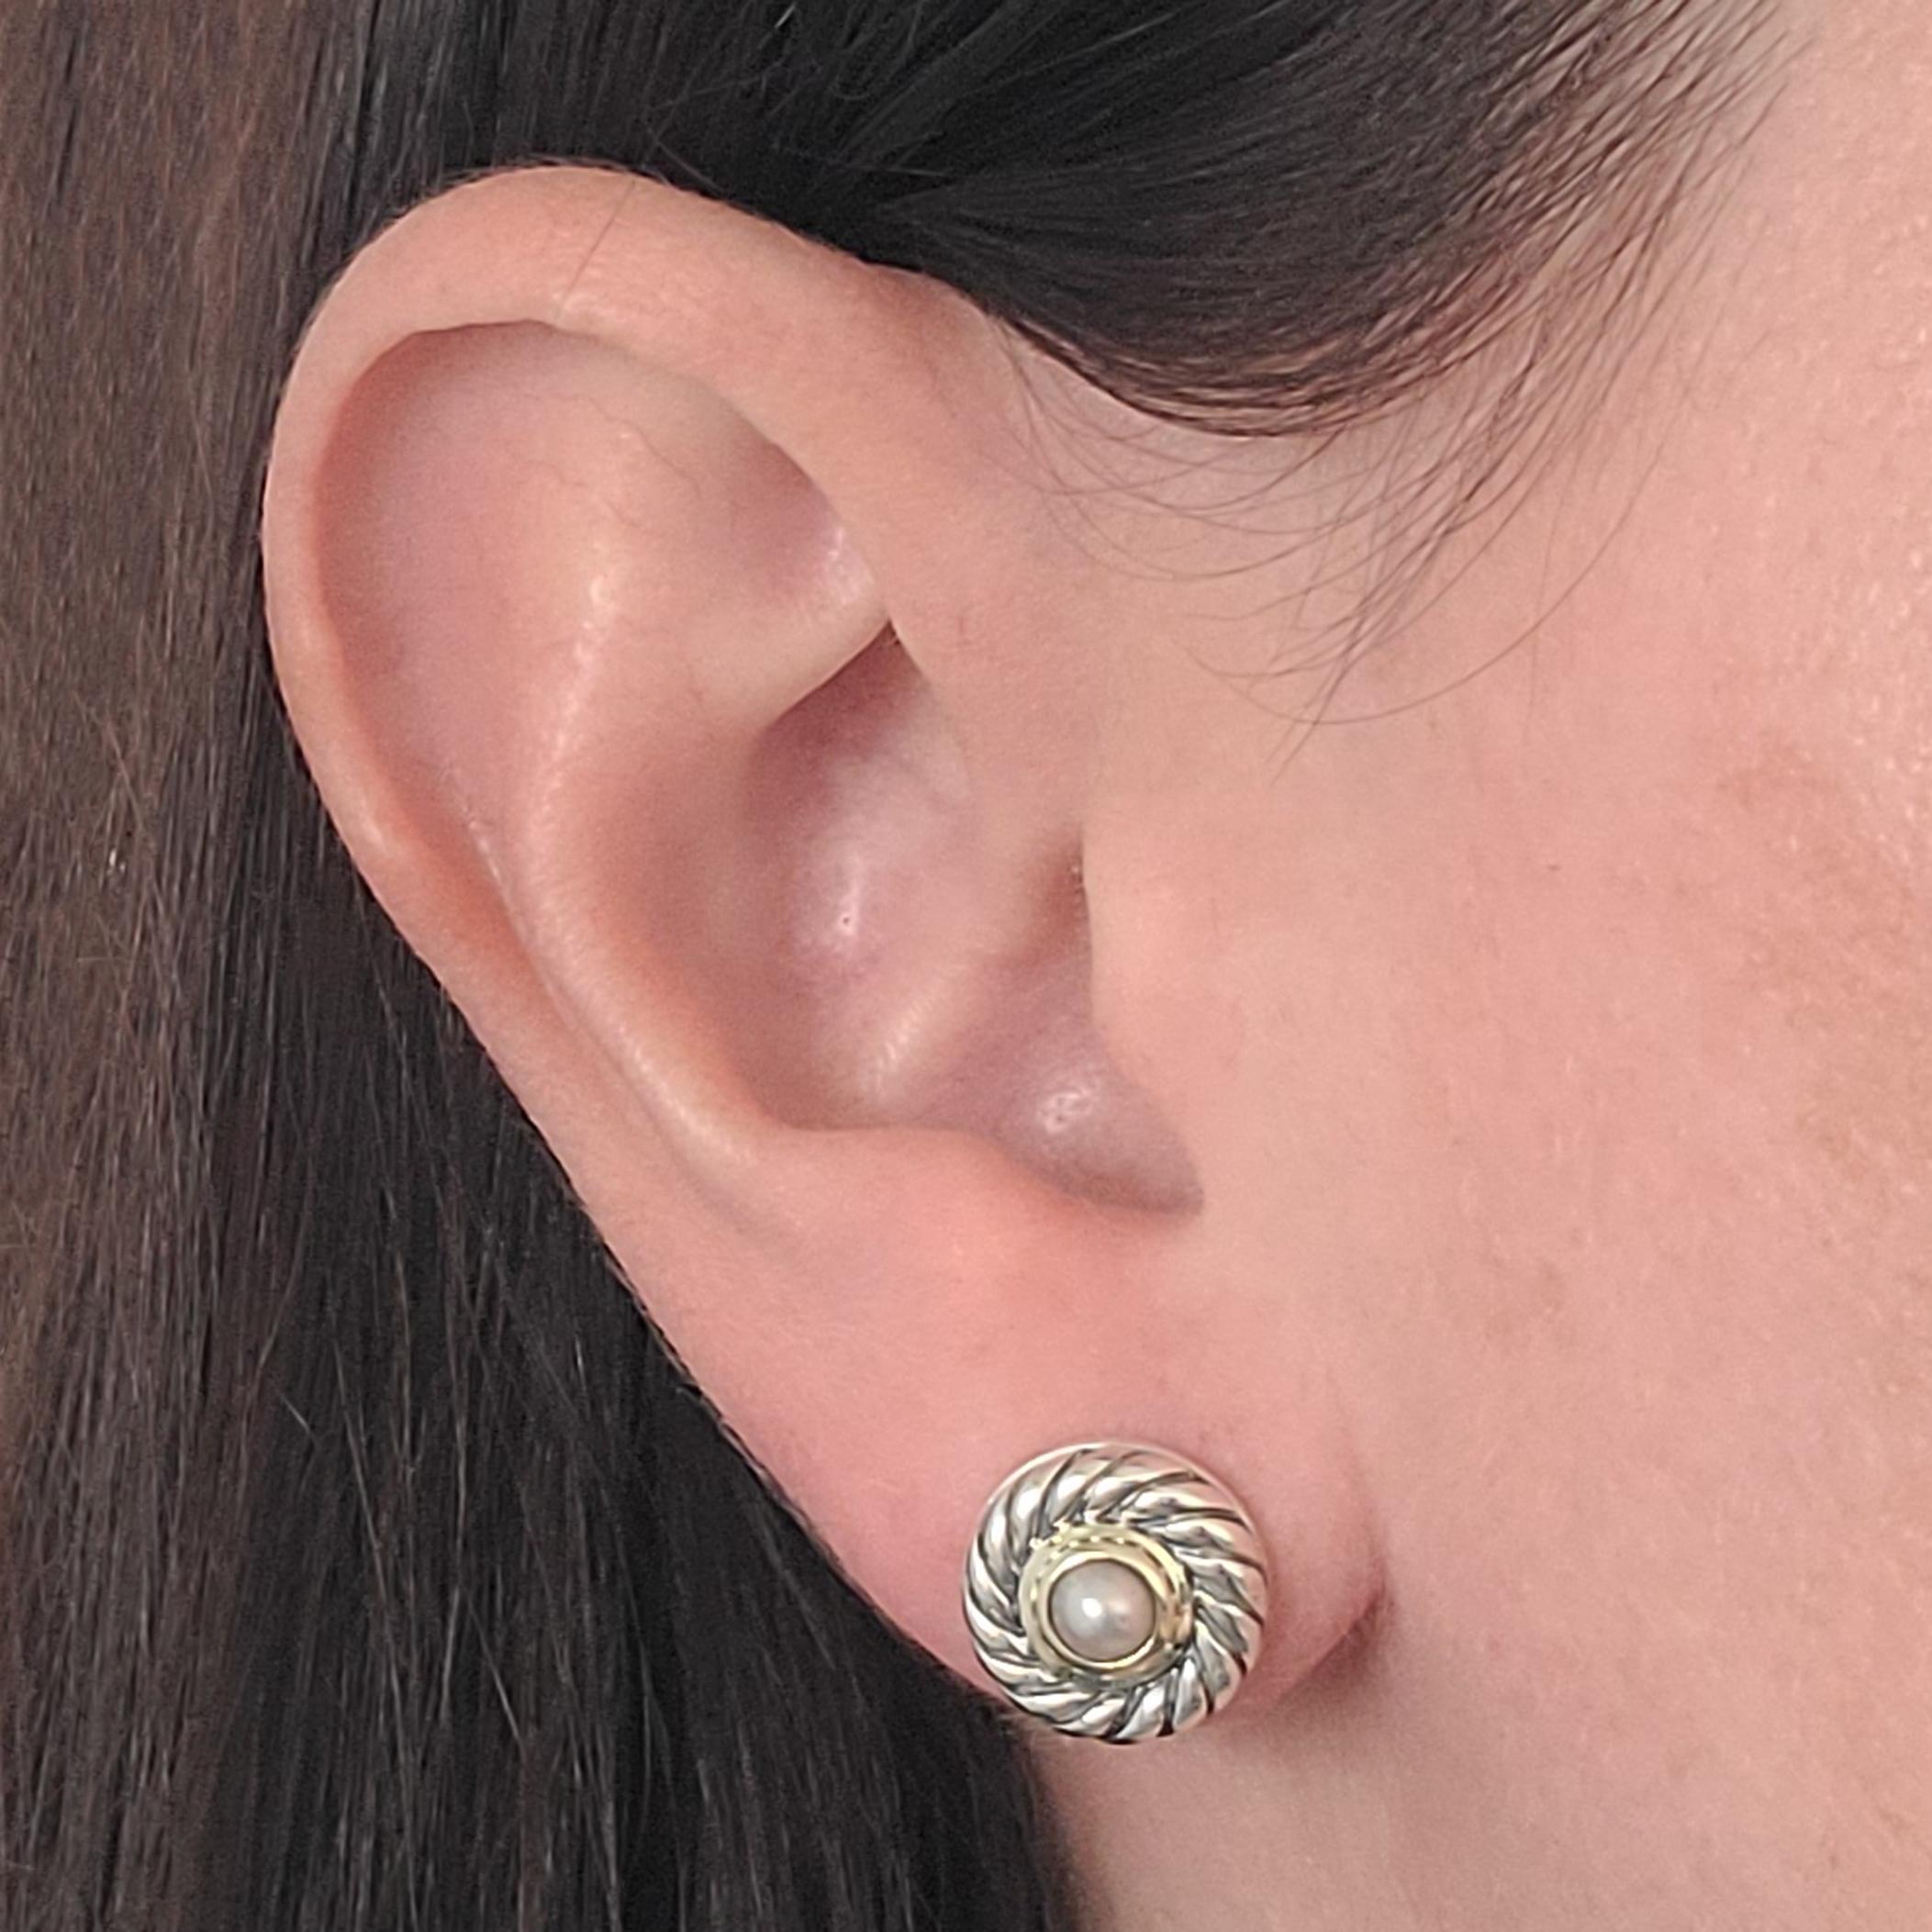 Pre-Owned David Yurman Sterling Silver and 14 Karat Yellow Gold Button Earrings With Pearl Centers. Friction Post With Push Back. Original MSRP $450.00